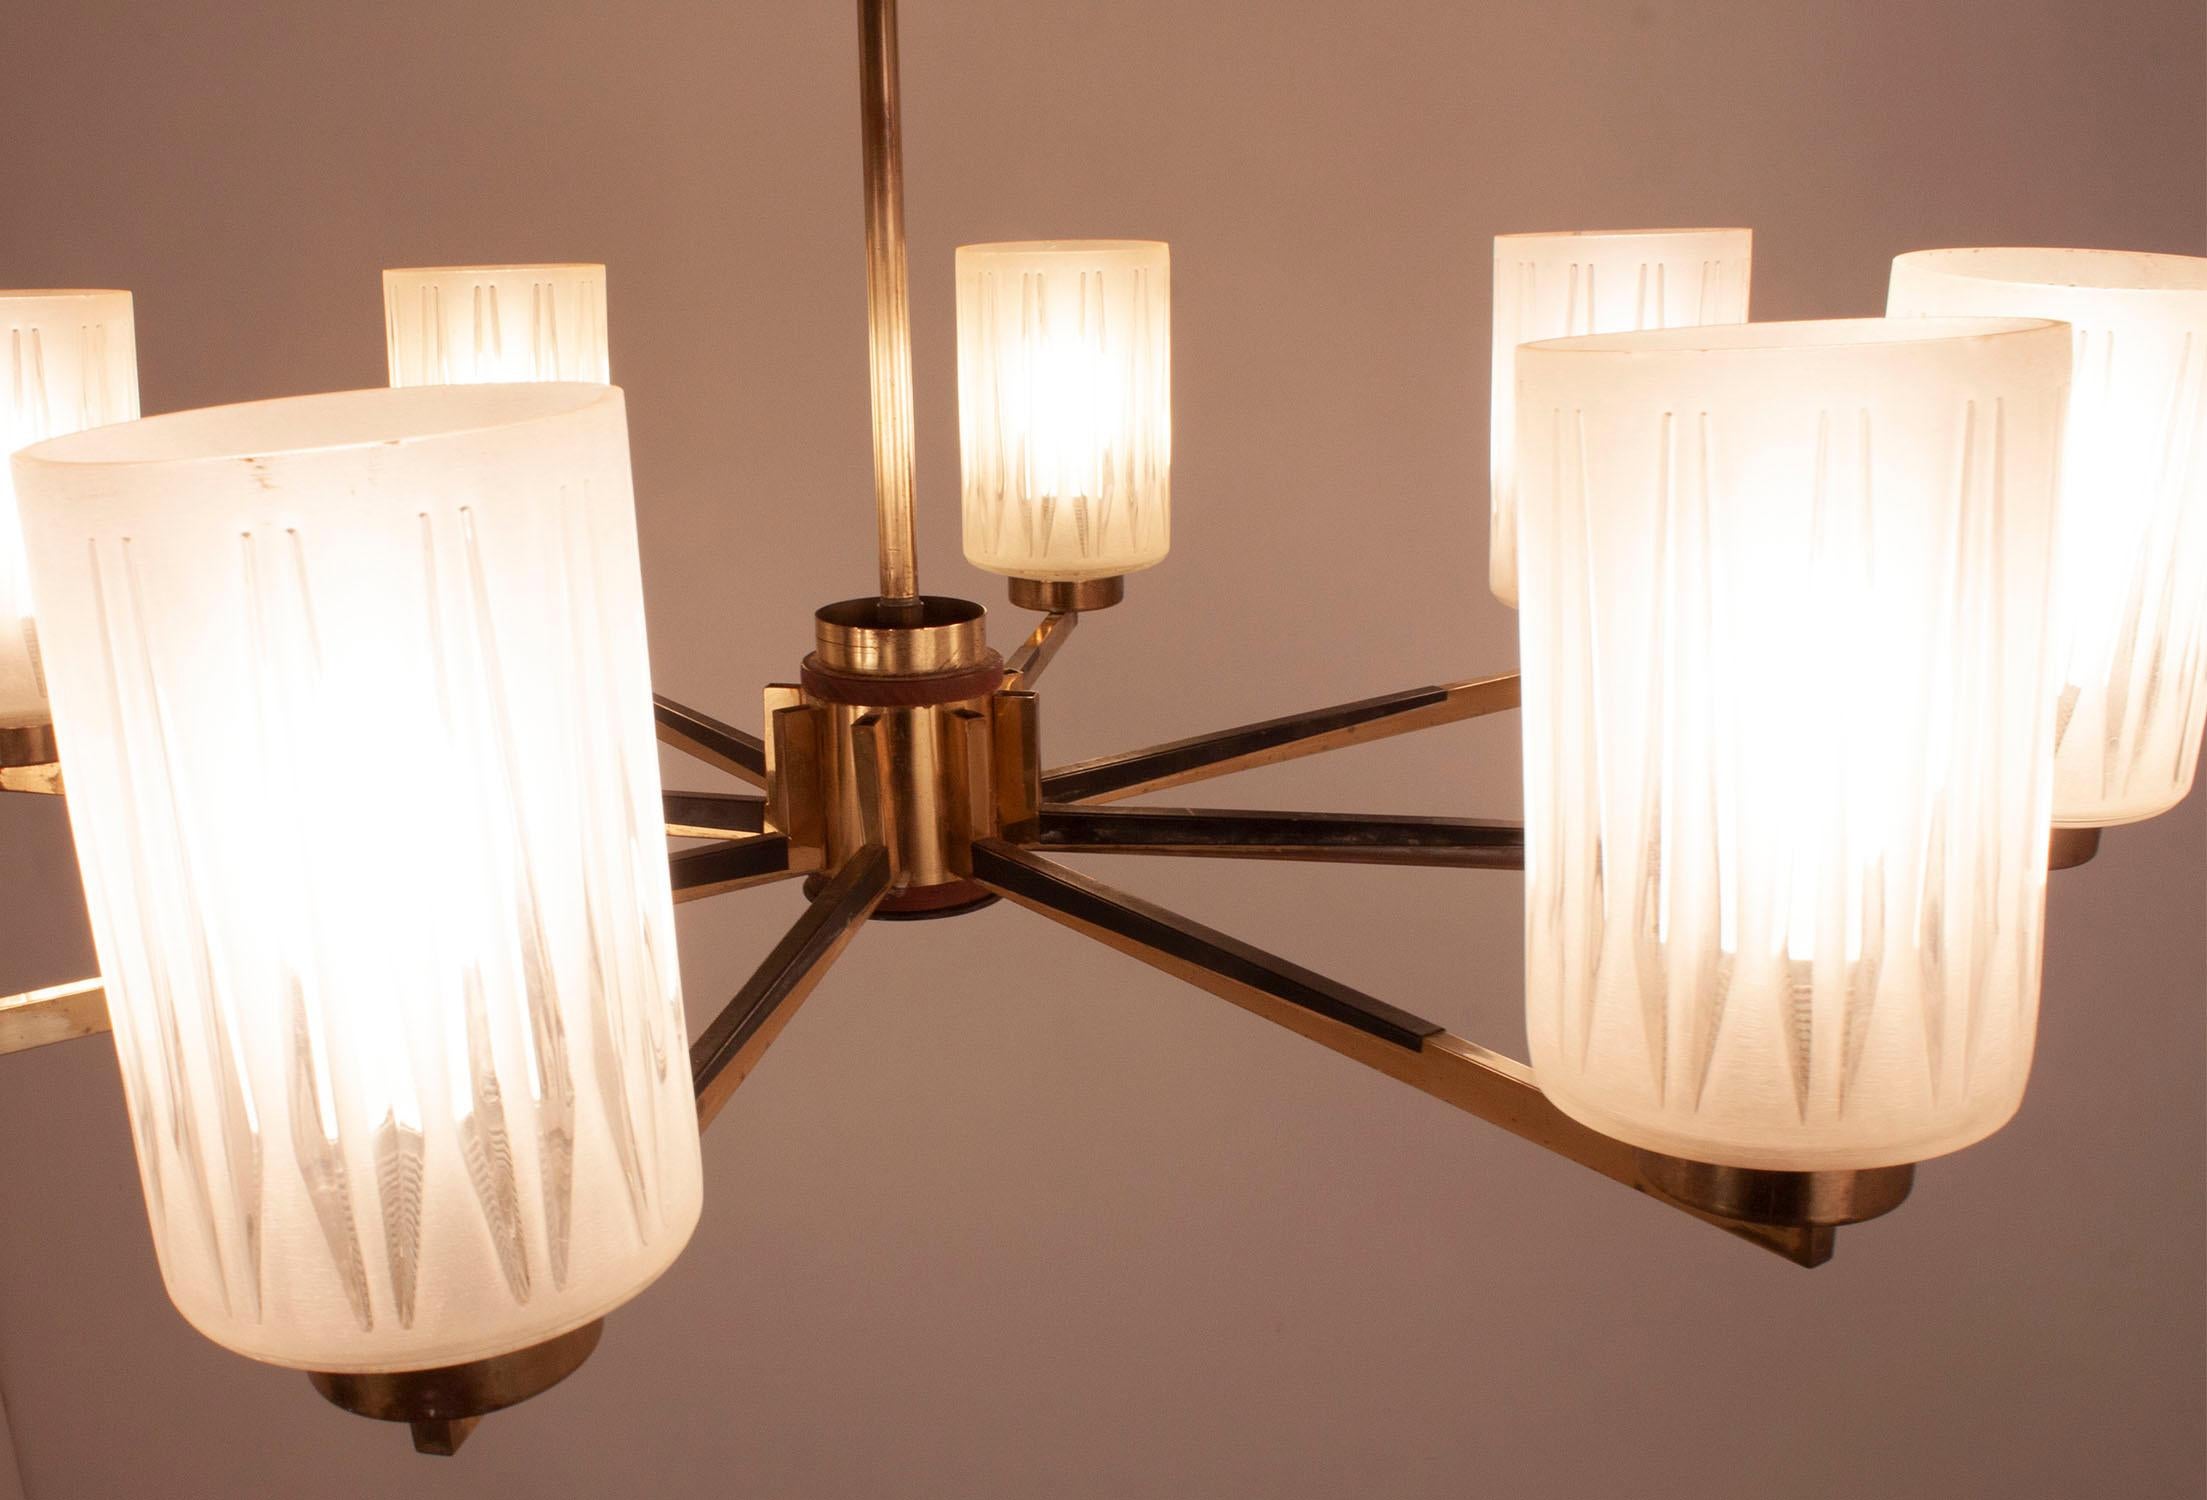 Mid-20th Century Chandelier with 8 Lights, Polished Brass, Glass Lampshades, Germany, 1950s For Sale